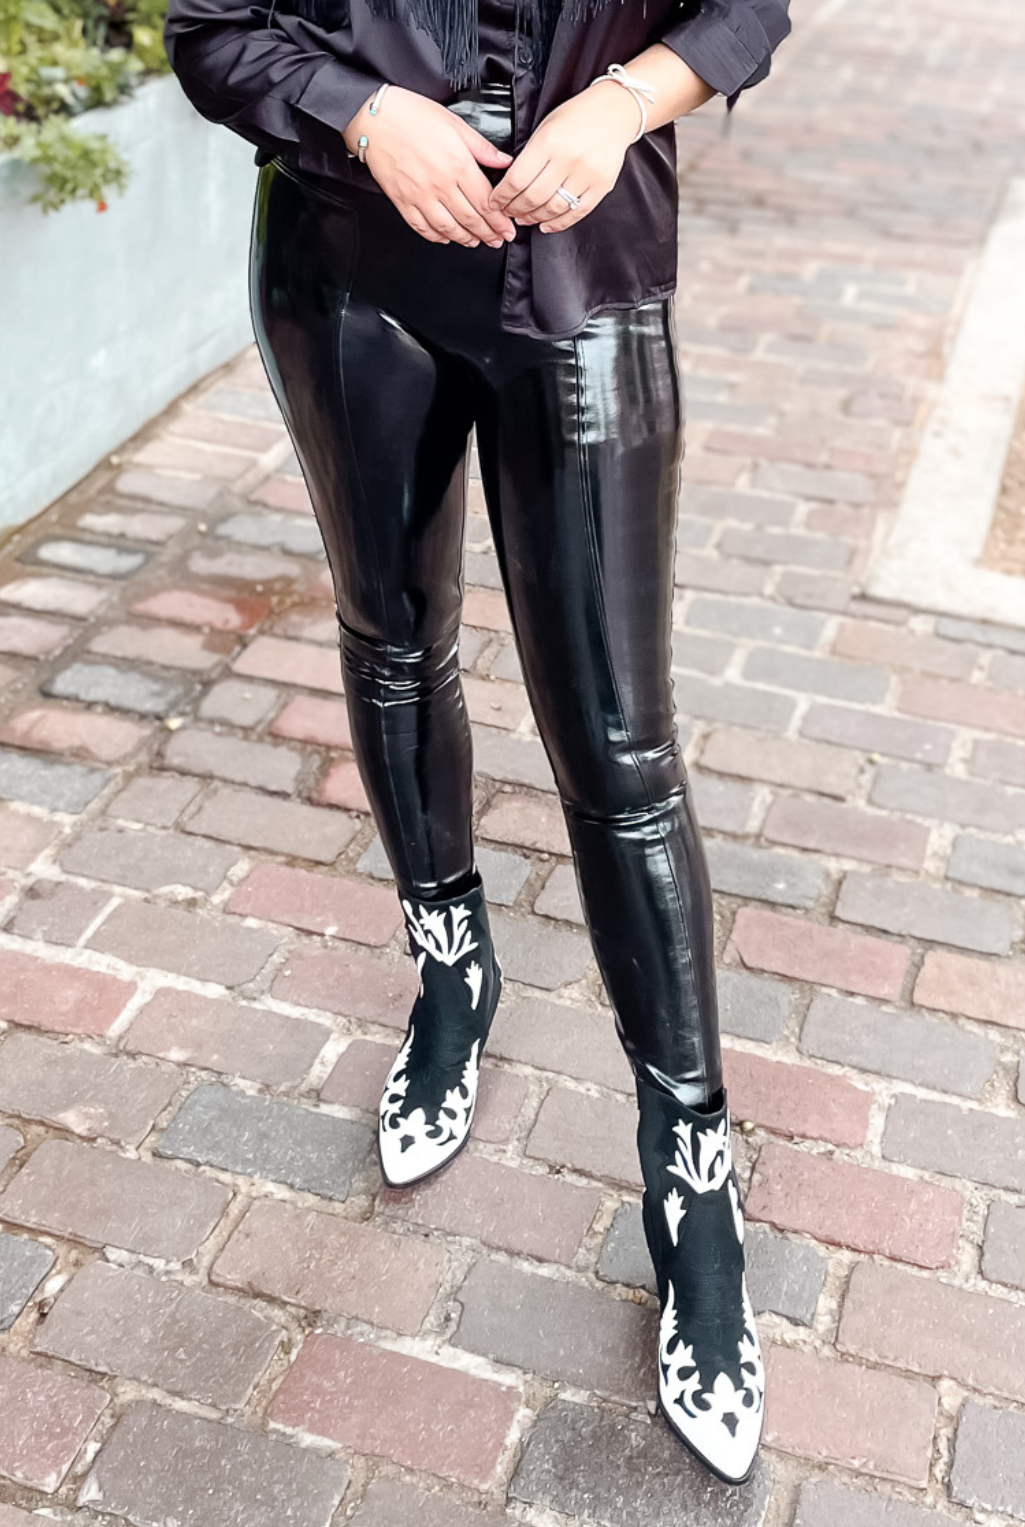 Girls in casual latex leggings outfits outdoors  Wet look leggings, Shiny  clothes, Outfits with leggings